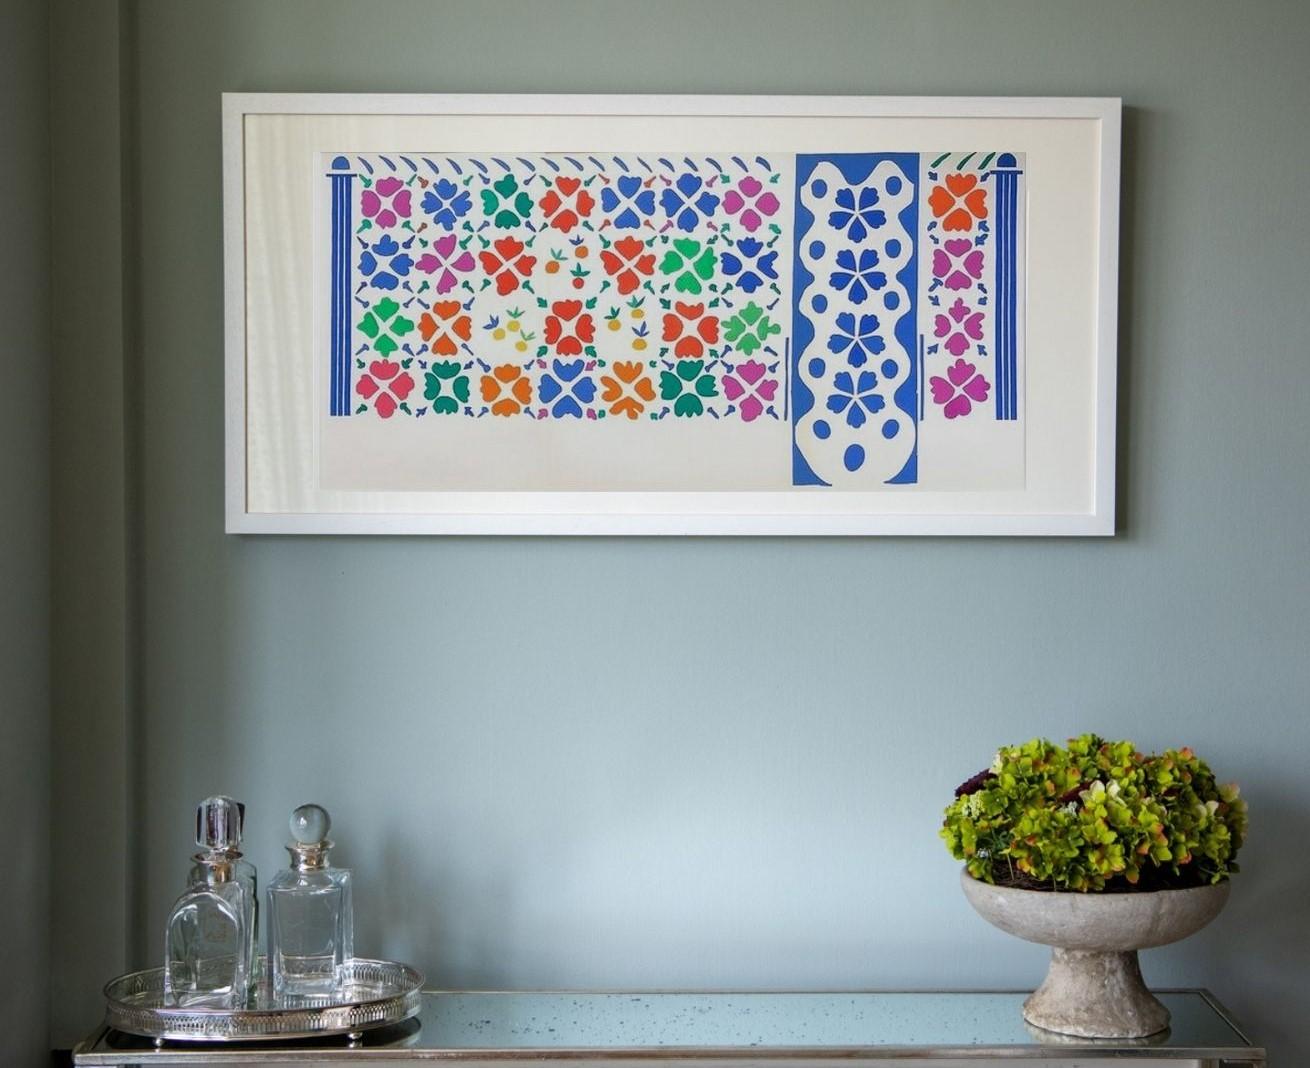 This lithograph titled Décoration Fruits, is a reproduction of one of Matisse's designs which was incorporated into a volume of Verve -  which featured lithographs produced directly by Matisse working with Mourlot. The volume was published